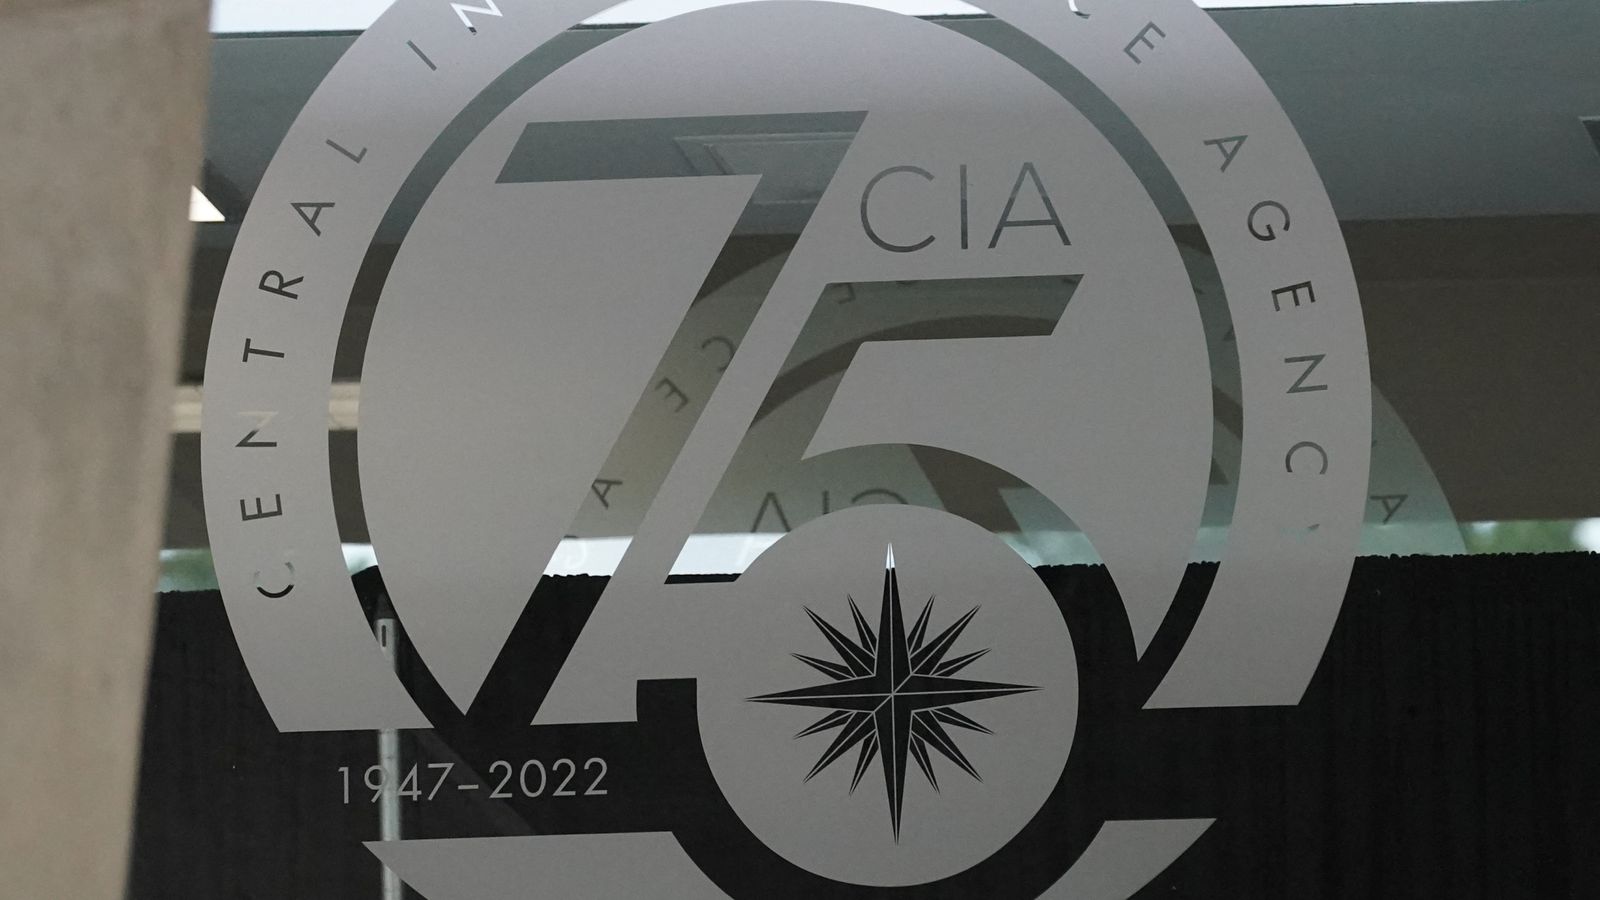 Joshua Schulte: Former CIA employee jailed for 40 years for largest leak in agency's history